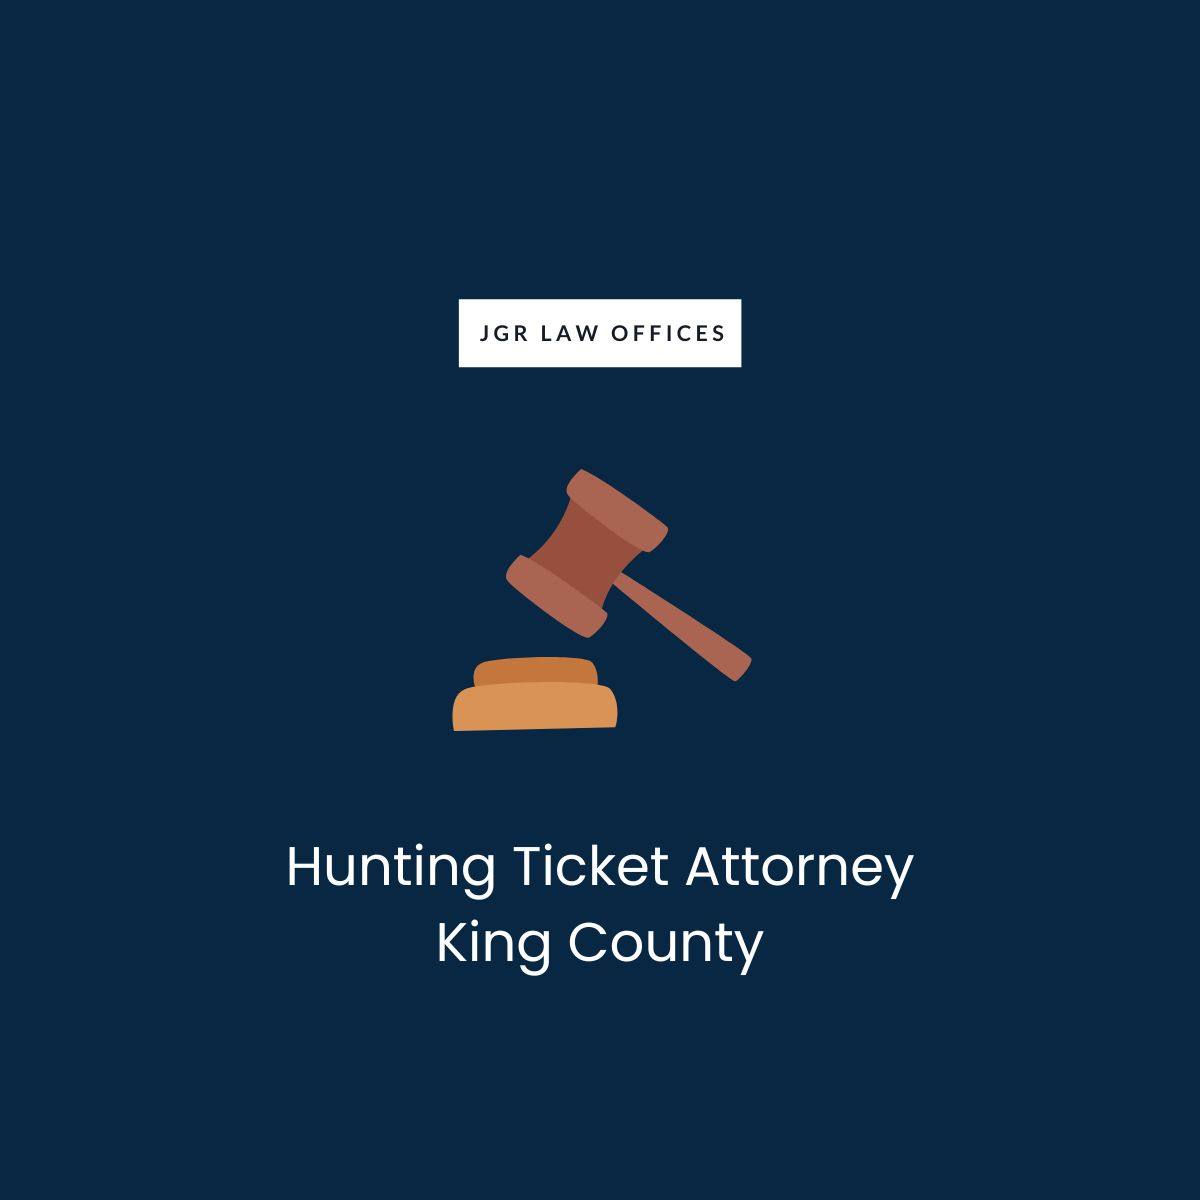 Hunting Ticket Attorney King County